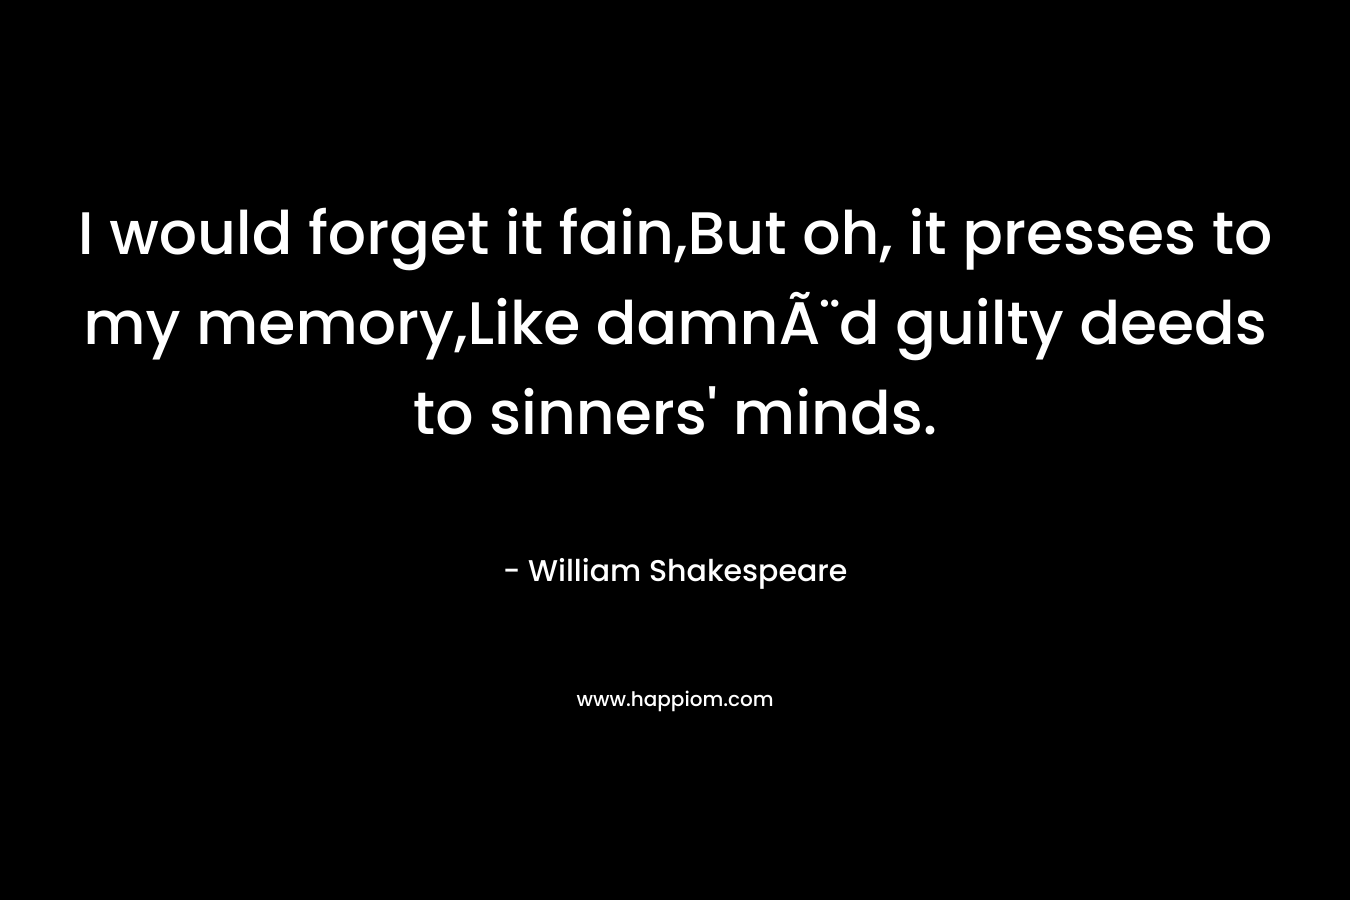 I would forget it fain,But oh, it presses to my memory,Like damnÃ¨d guilty deeds to sinners’ minds. – William Shakespeare